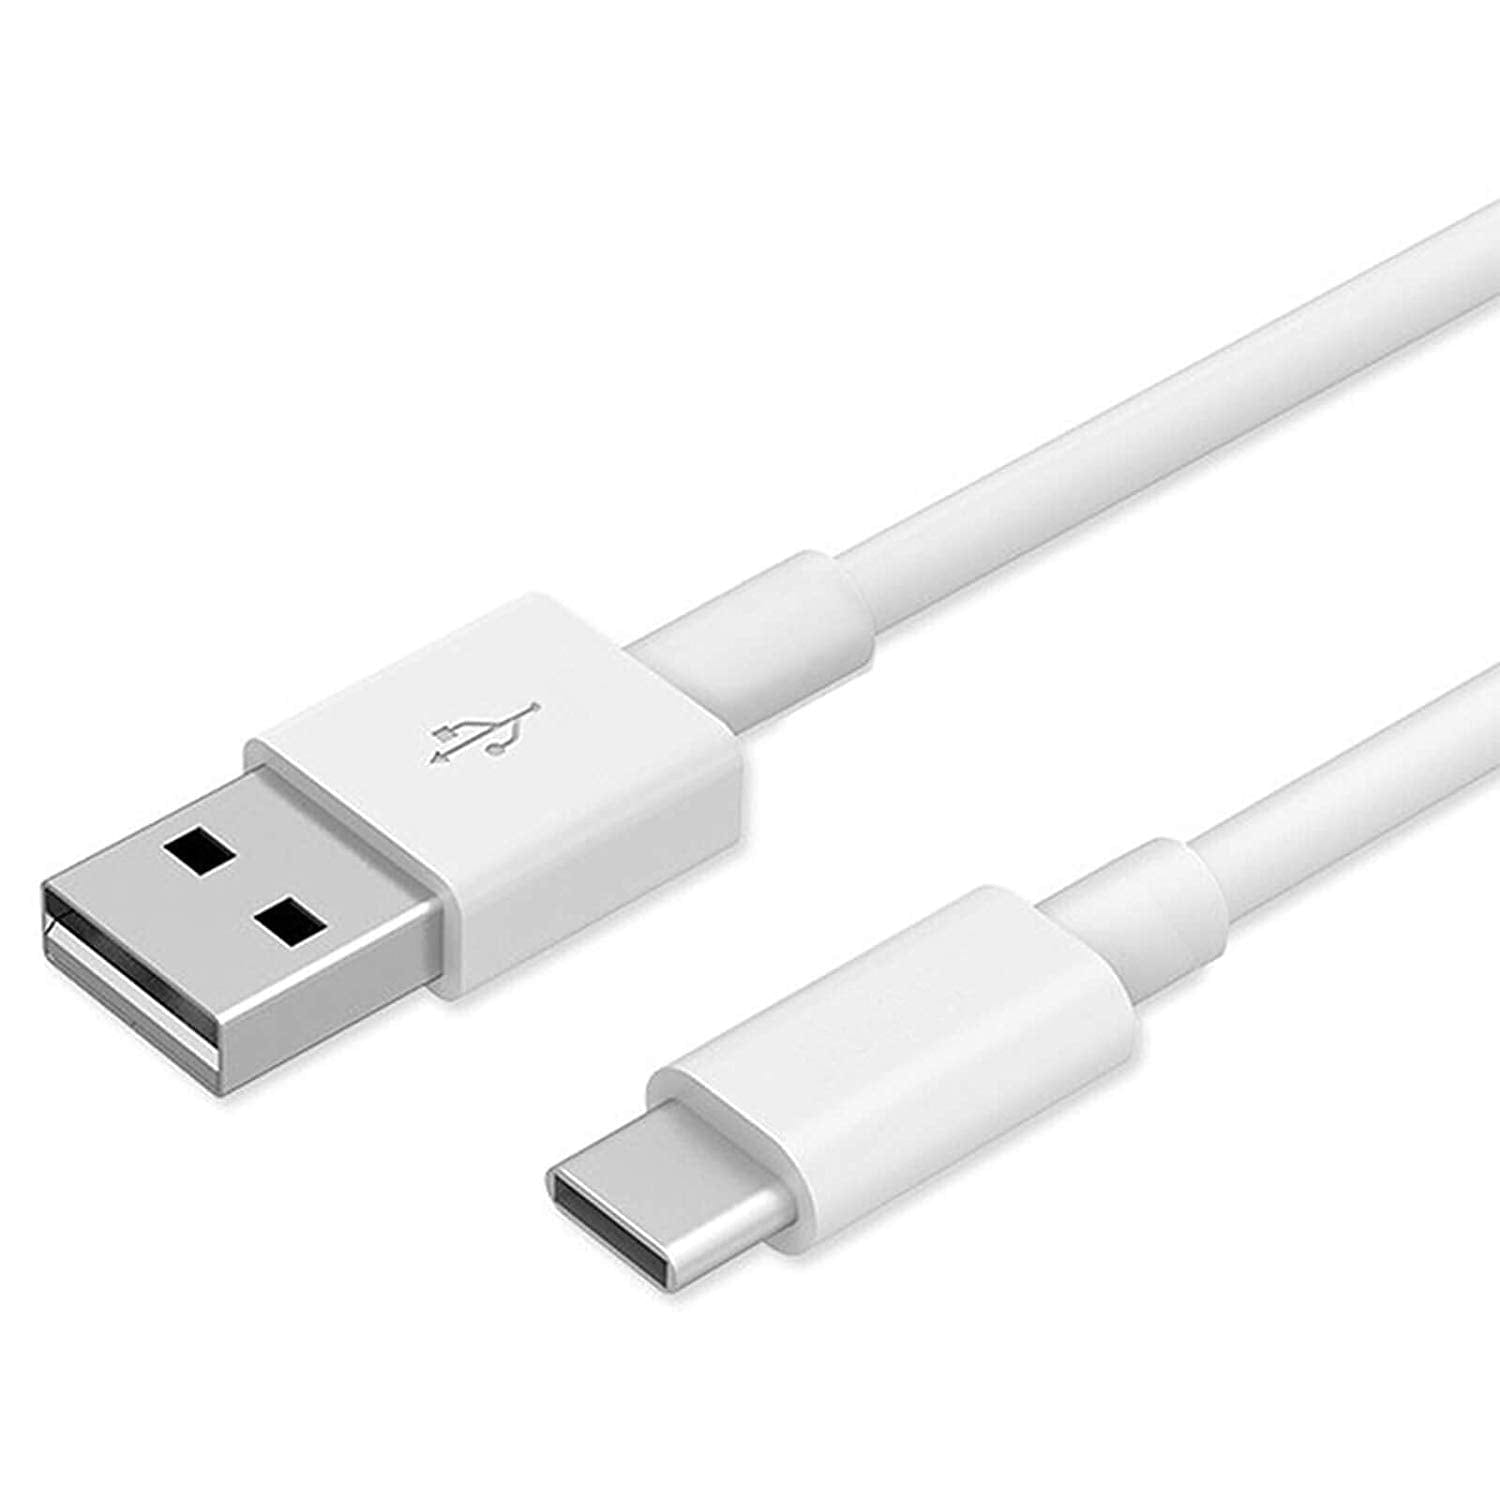 Samsung Galaxy M31 USB to Type C Charging Cable Lead White - 1M - SmartPhoneGadgetUK